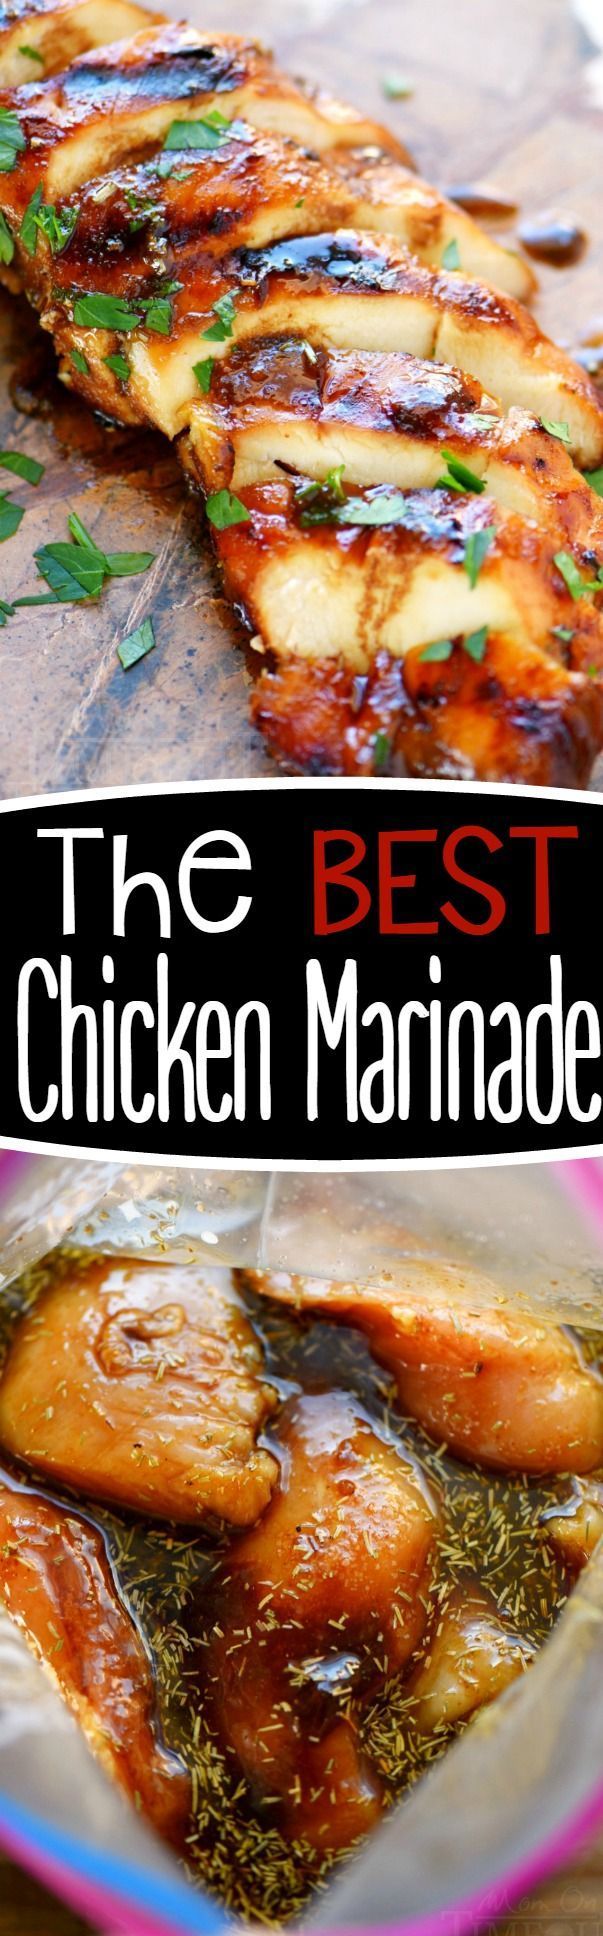 Look no further for the Best Chicken Marinade recipe ever! This easy chicken marinade recipe is going to quickly become your